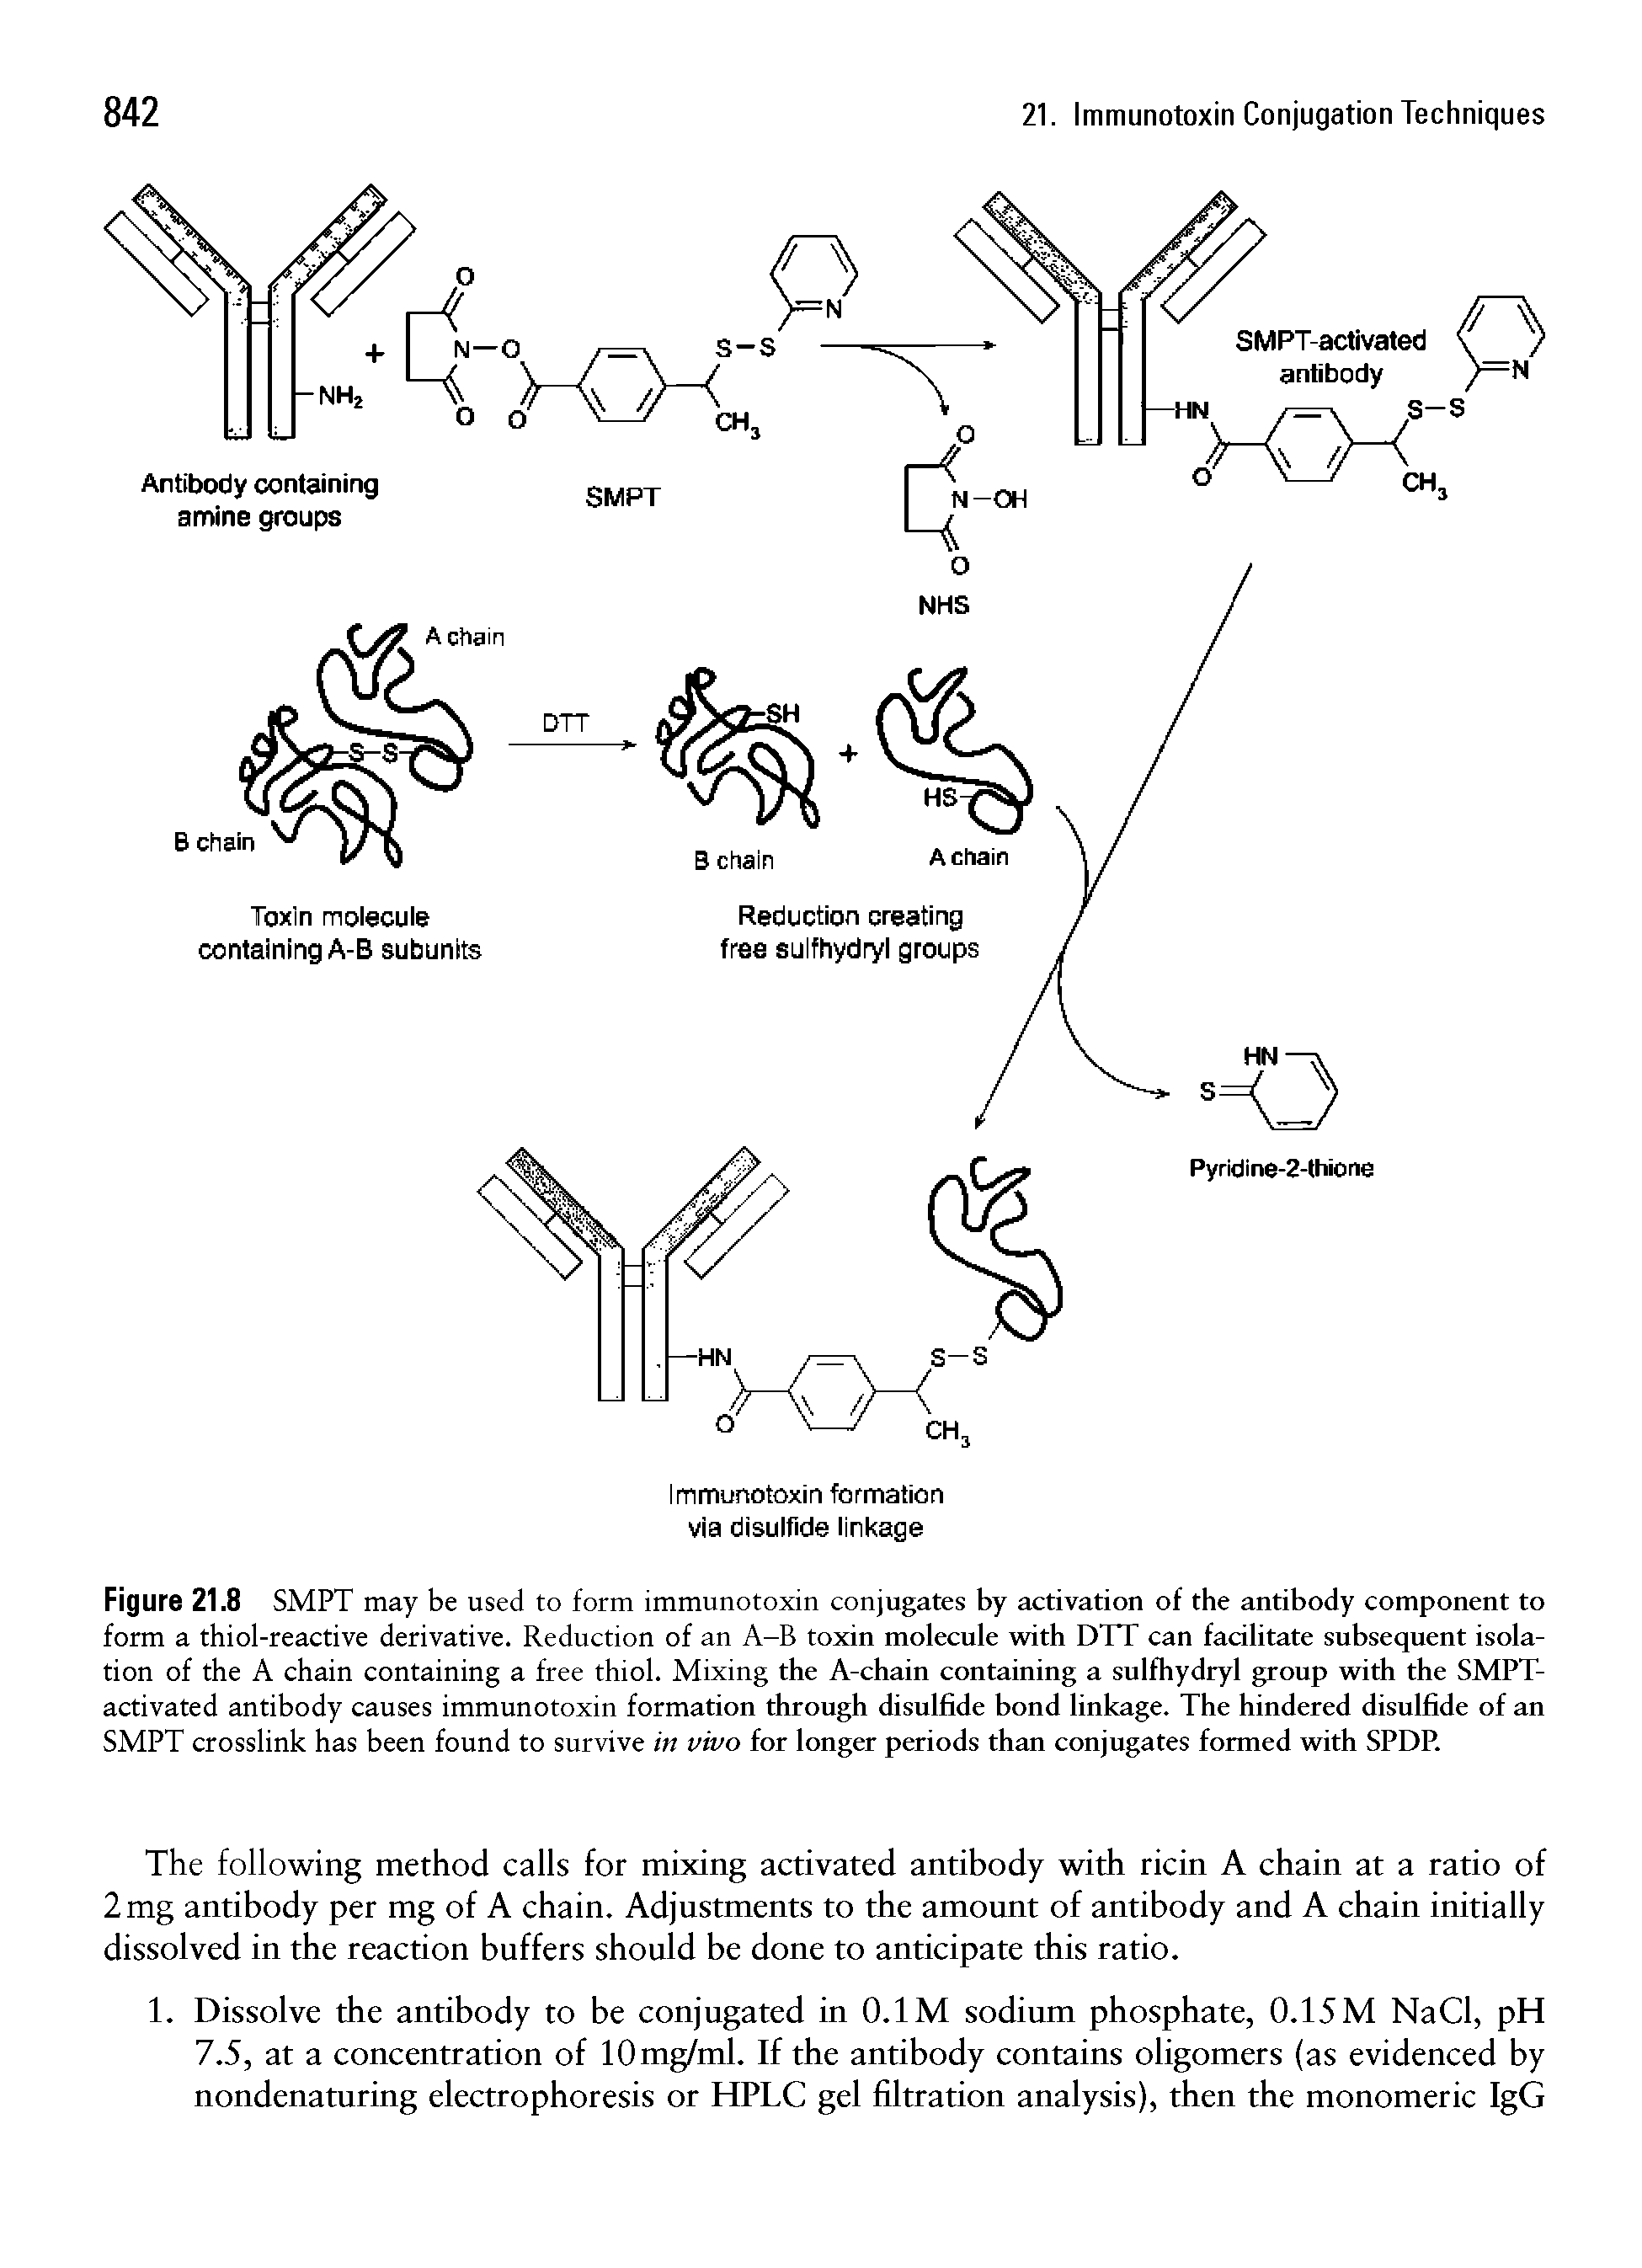 Figure 21.8 SMPT may be used to form immunotoxin conjugates by activation of the antibody component to form a thiol-reactive derivative. Reduction of an A-B toxin molecule with DTT can facilitate subsequent isolation of the A chain containing a free thiol. Mixing the A-chain containing a sulfhydryl group with the SMPT-activated antibody causes immunotoxin formation through disulfide bond linkage. The hindered disulfide of an SMPT crosslink has been found to survive in vivo for longer periods than conjugates formed with SPDP.